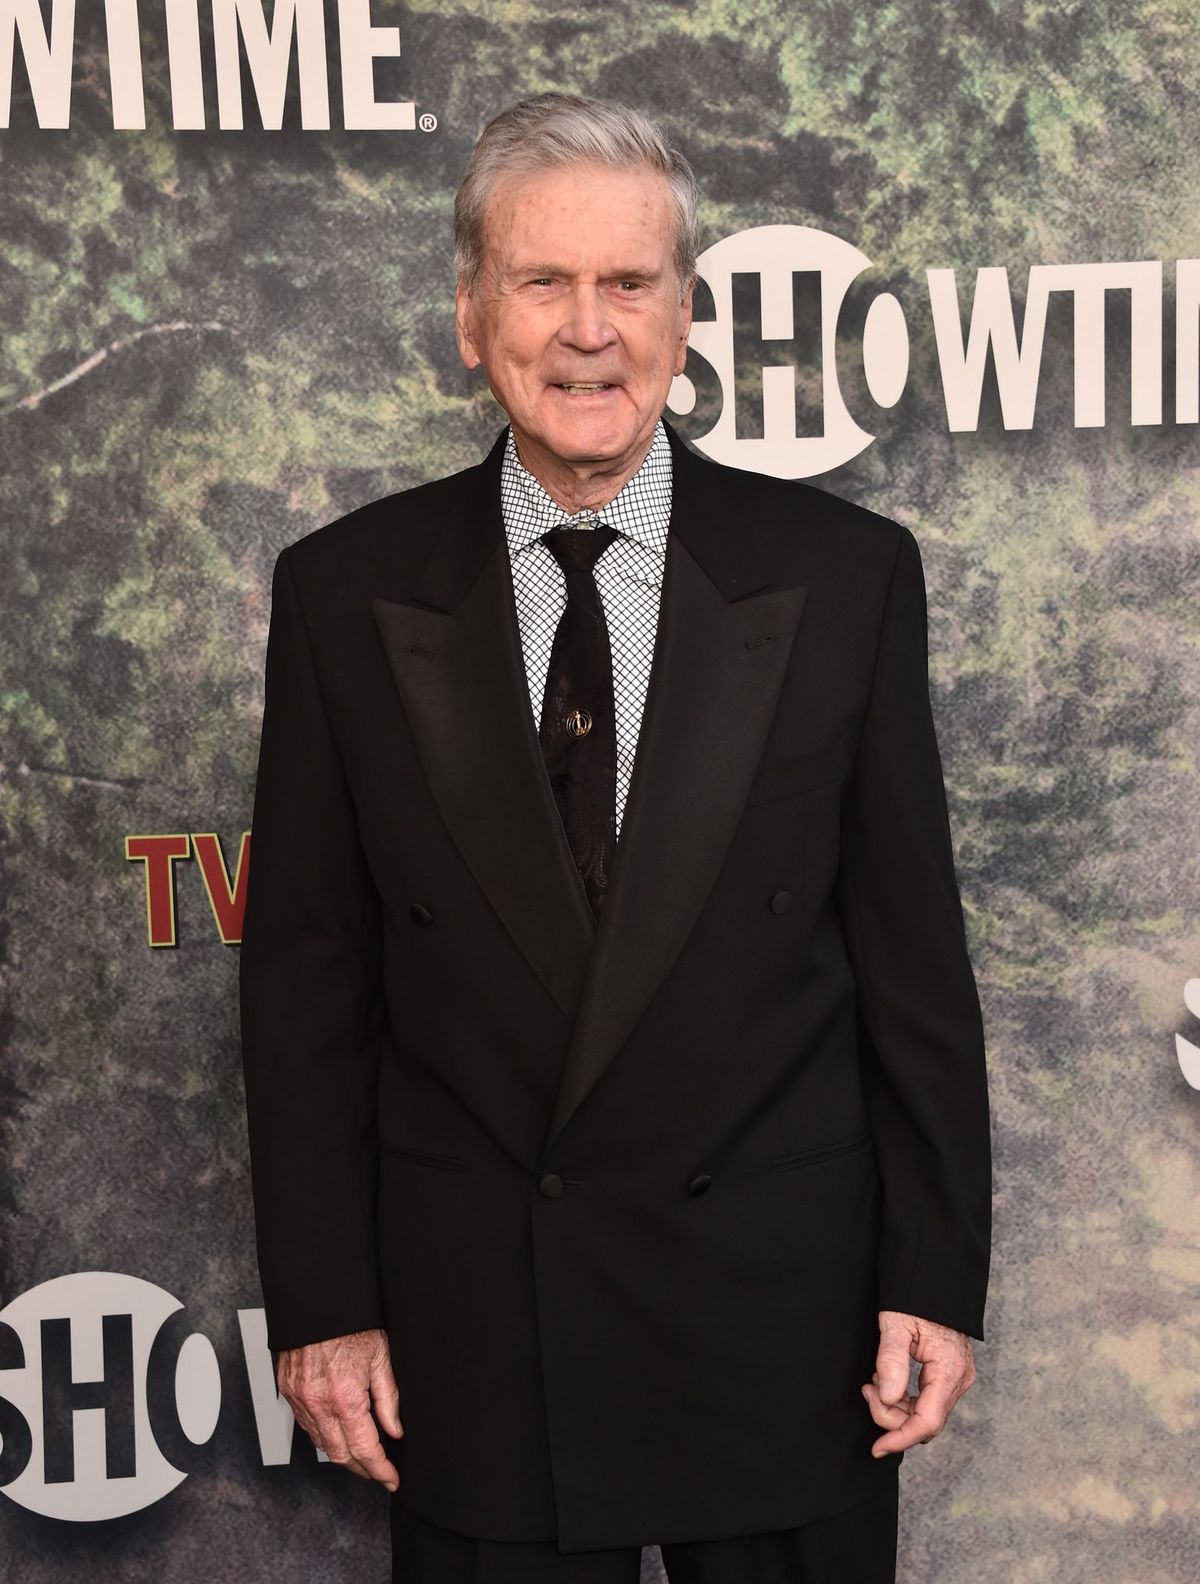 Don Murray attends the premiere of Showtime's "Twin Peaks" at The Theatre at Ace Hotel on May 19, 2017 in Los Angeles, California. | Photo: Getty Images